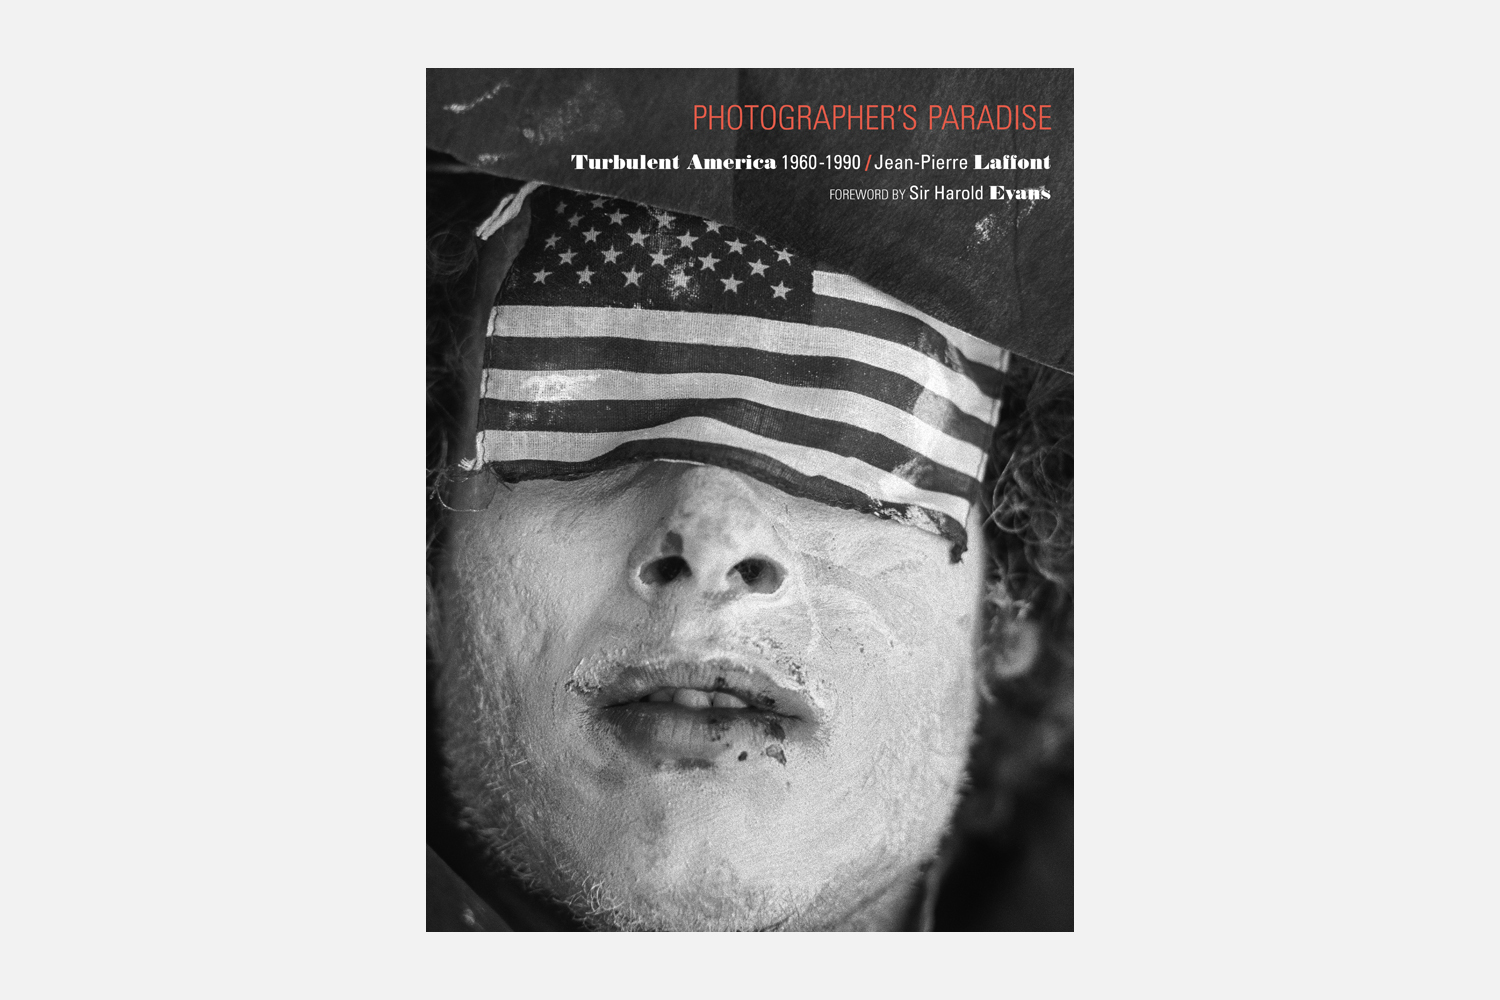 Jean-Pierre Laffont's Photographer's Paradise, published by Glitterati
                              A celebrity photographer who dreamt of being a photojournalist, Laffont left Paris and found a land of photographic opportunity in America